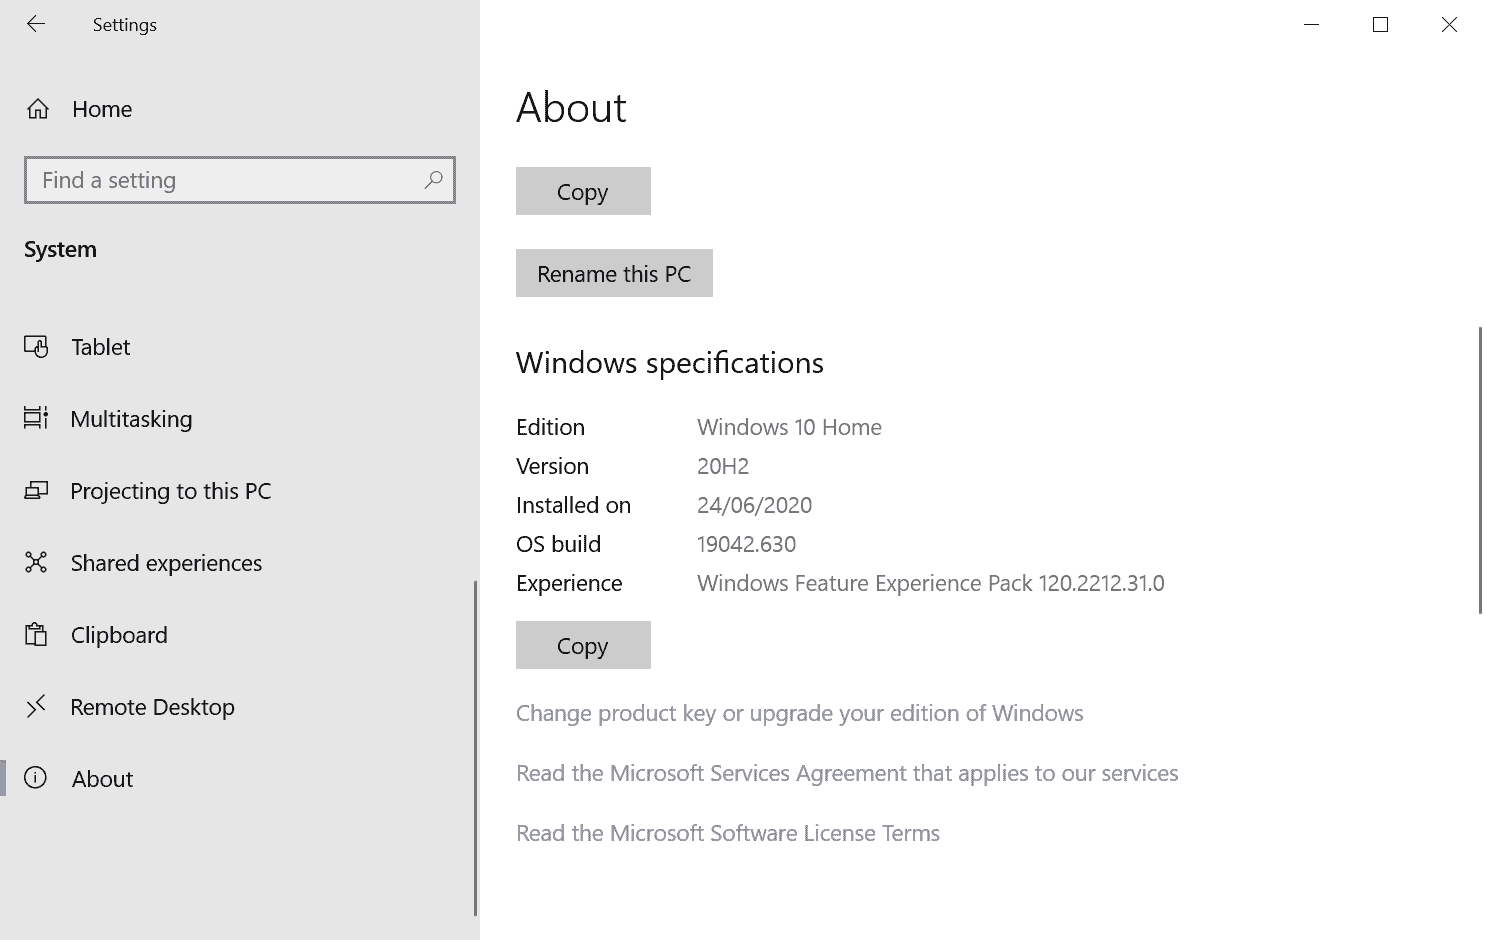 Windows Feature Experience Pack to independently unlock features on Windows 10